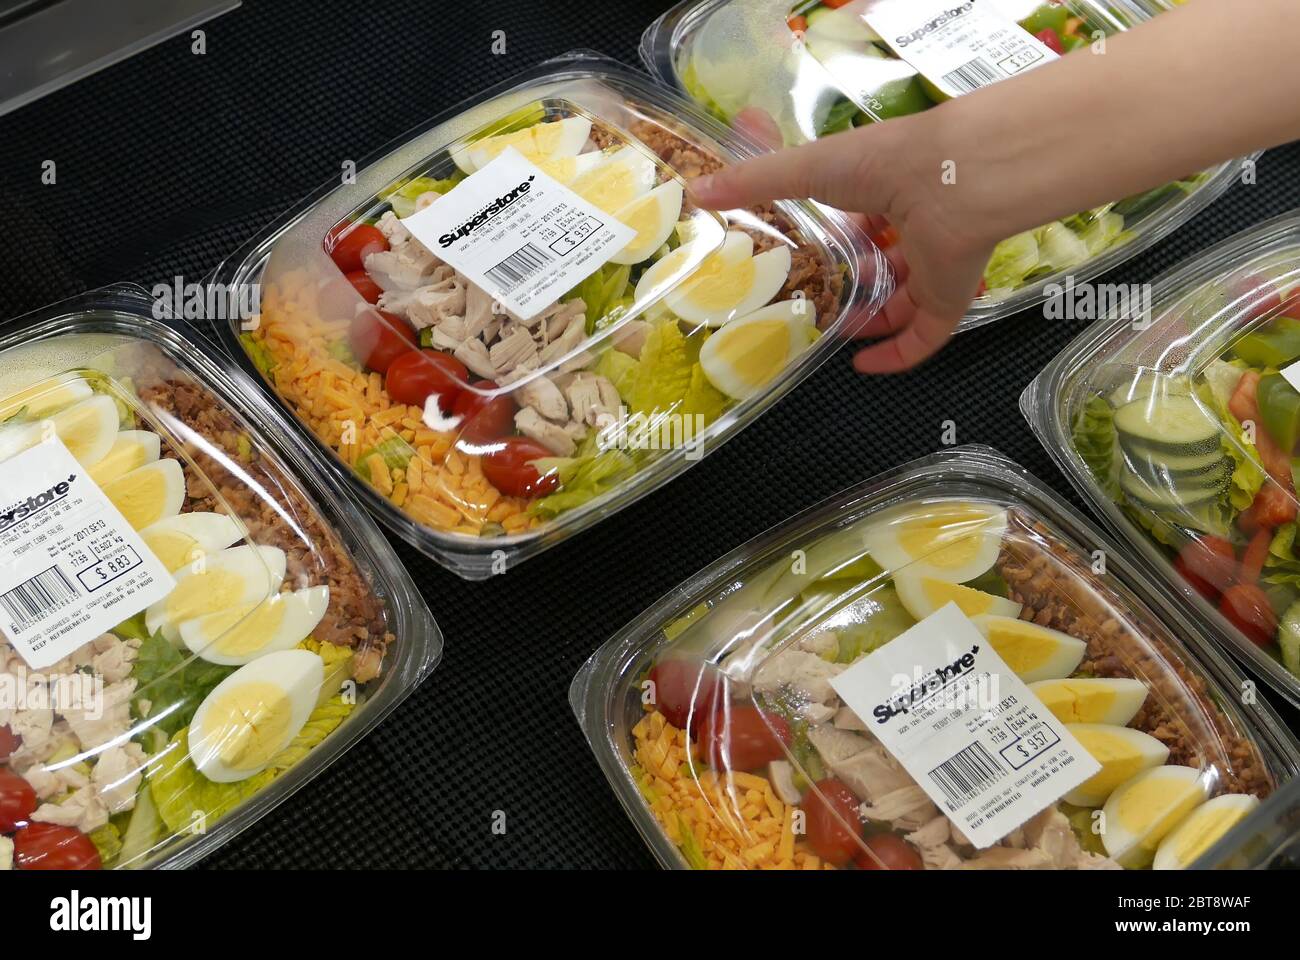 Motion of woman's hand picking salad inside superstore Stock Photo